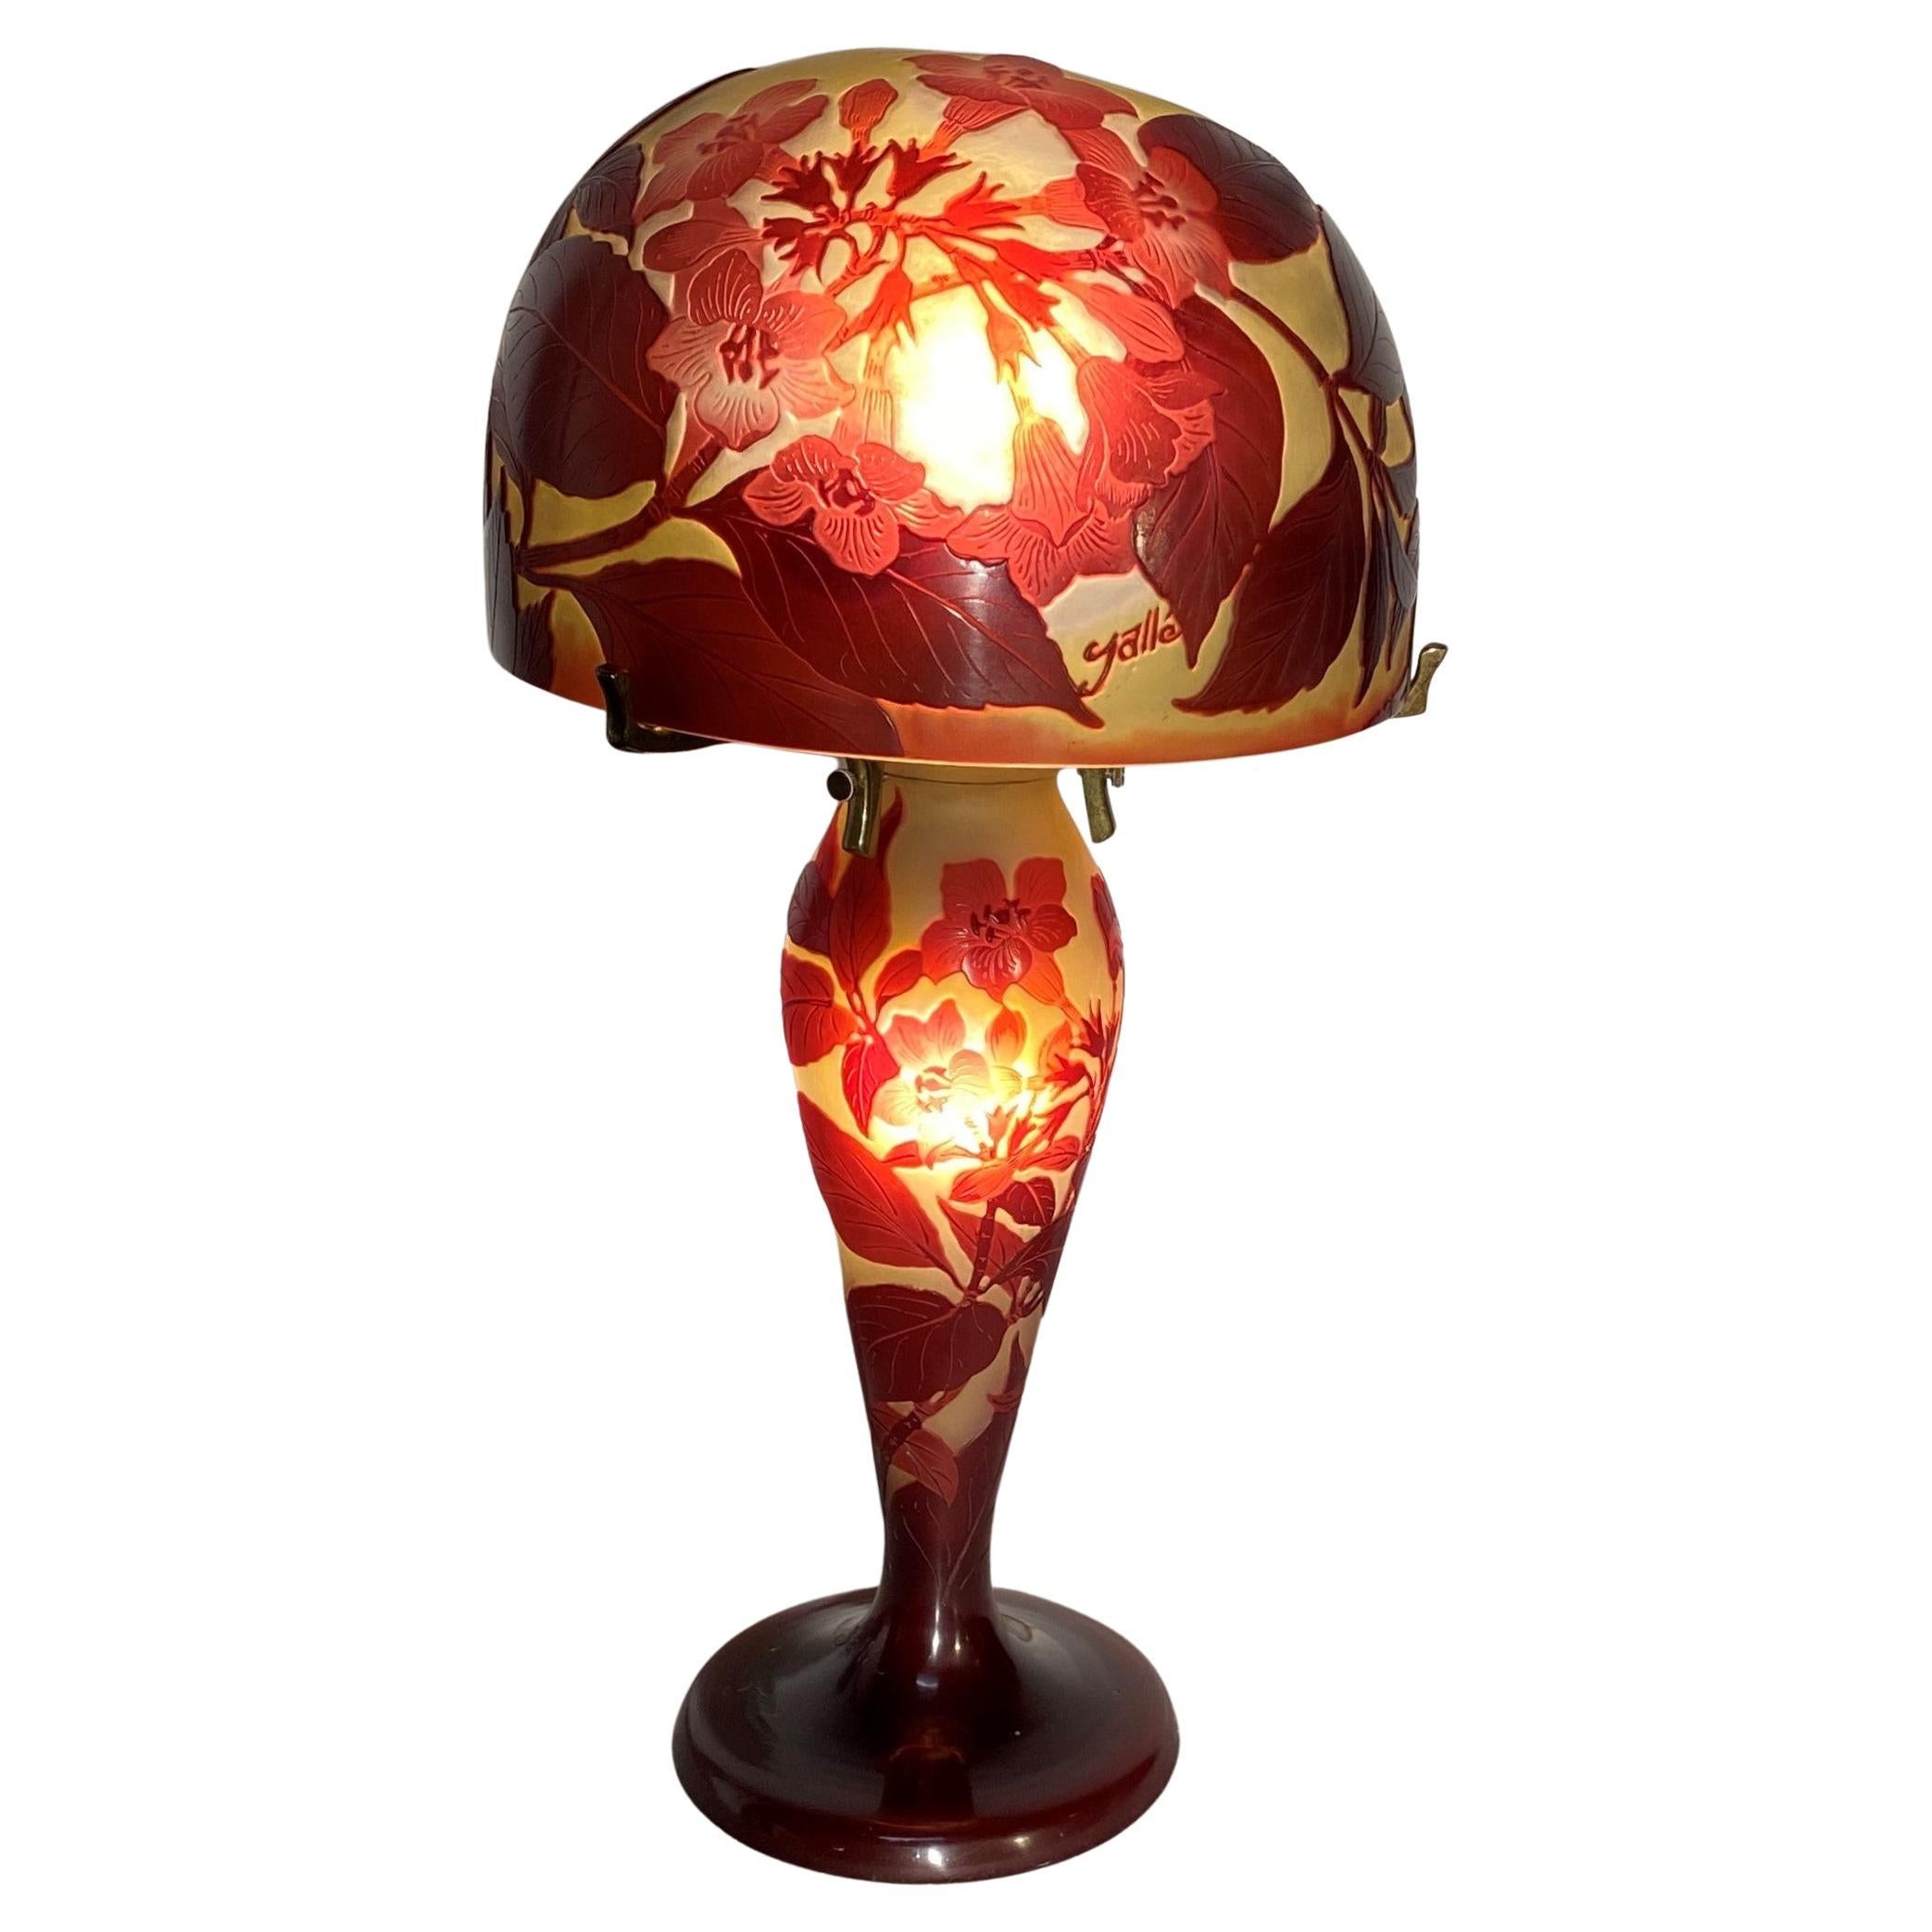 'Mushroom' Lamp In Multi-Layer Glass With Flower Decor  Emile Gallé